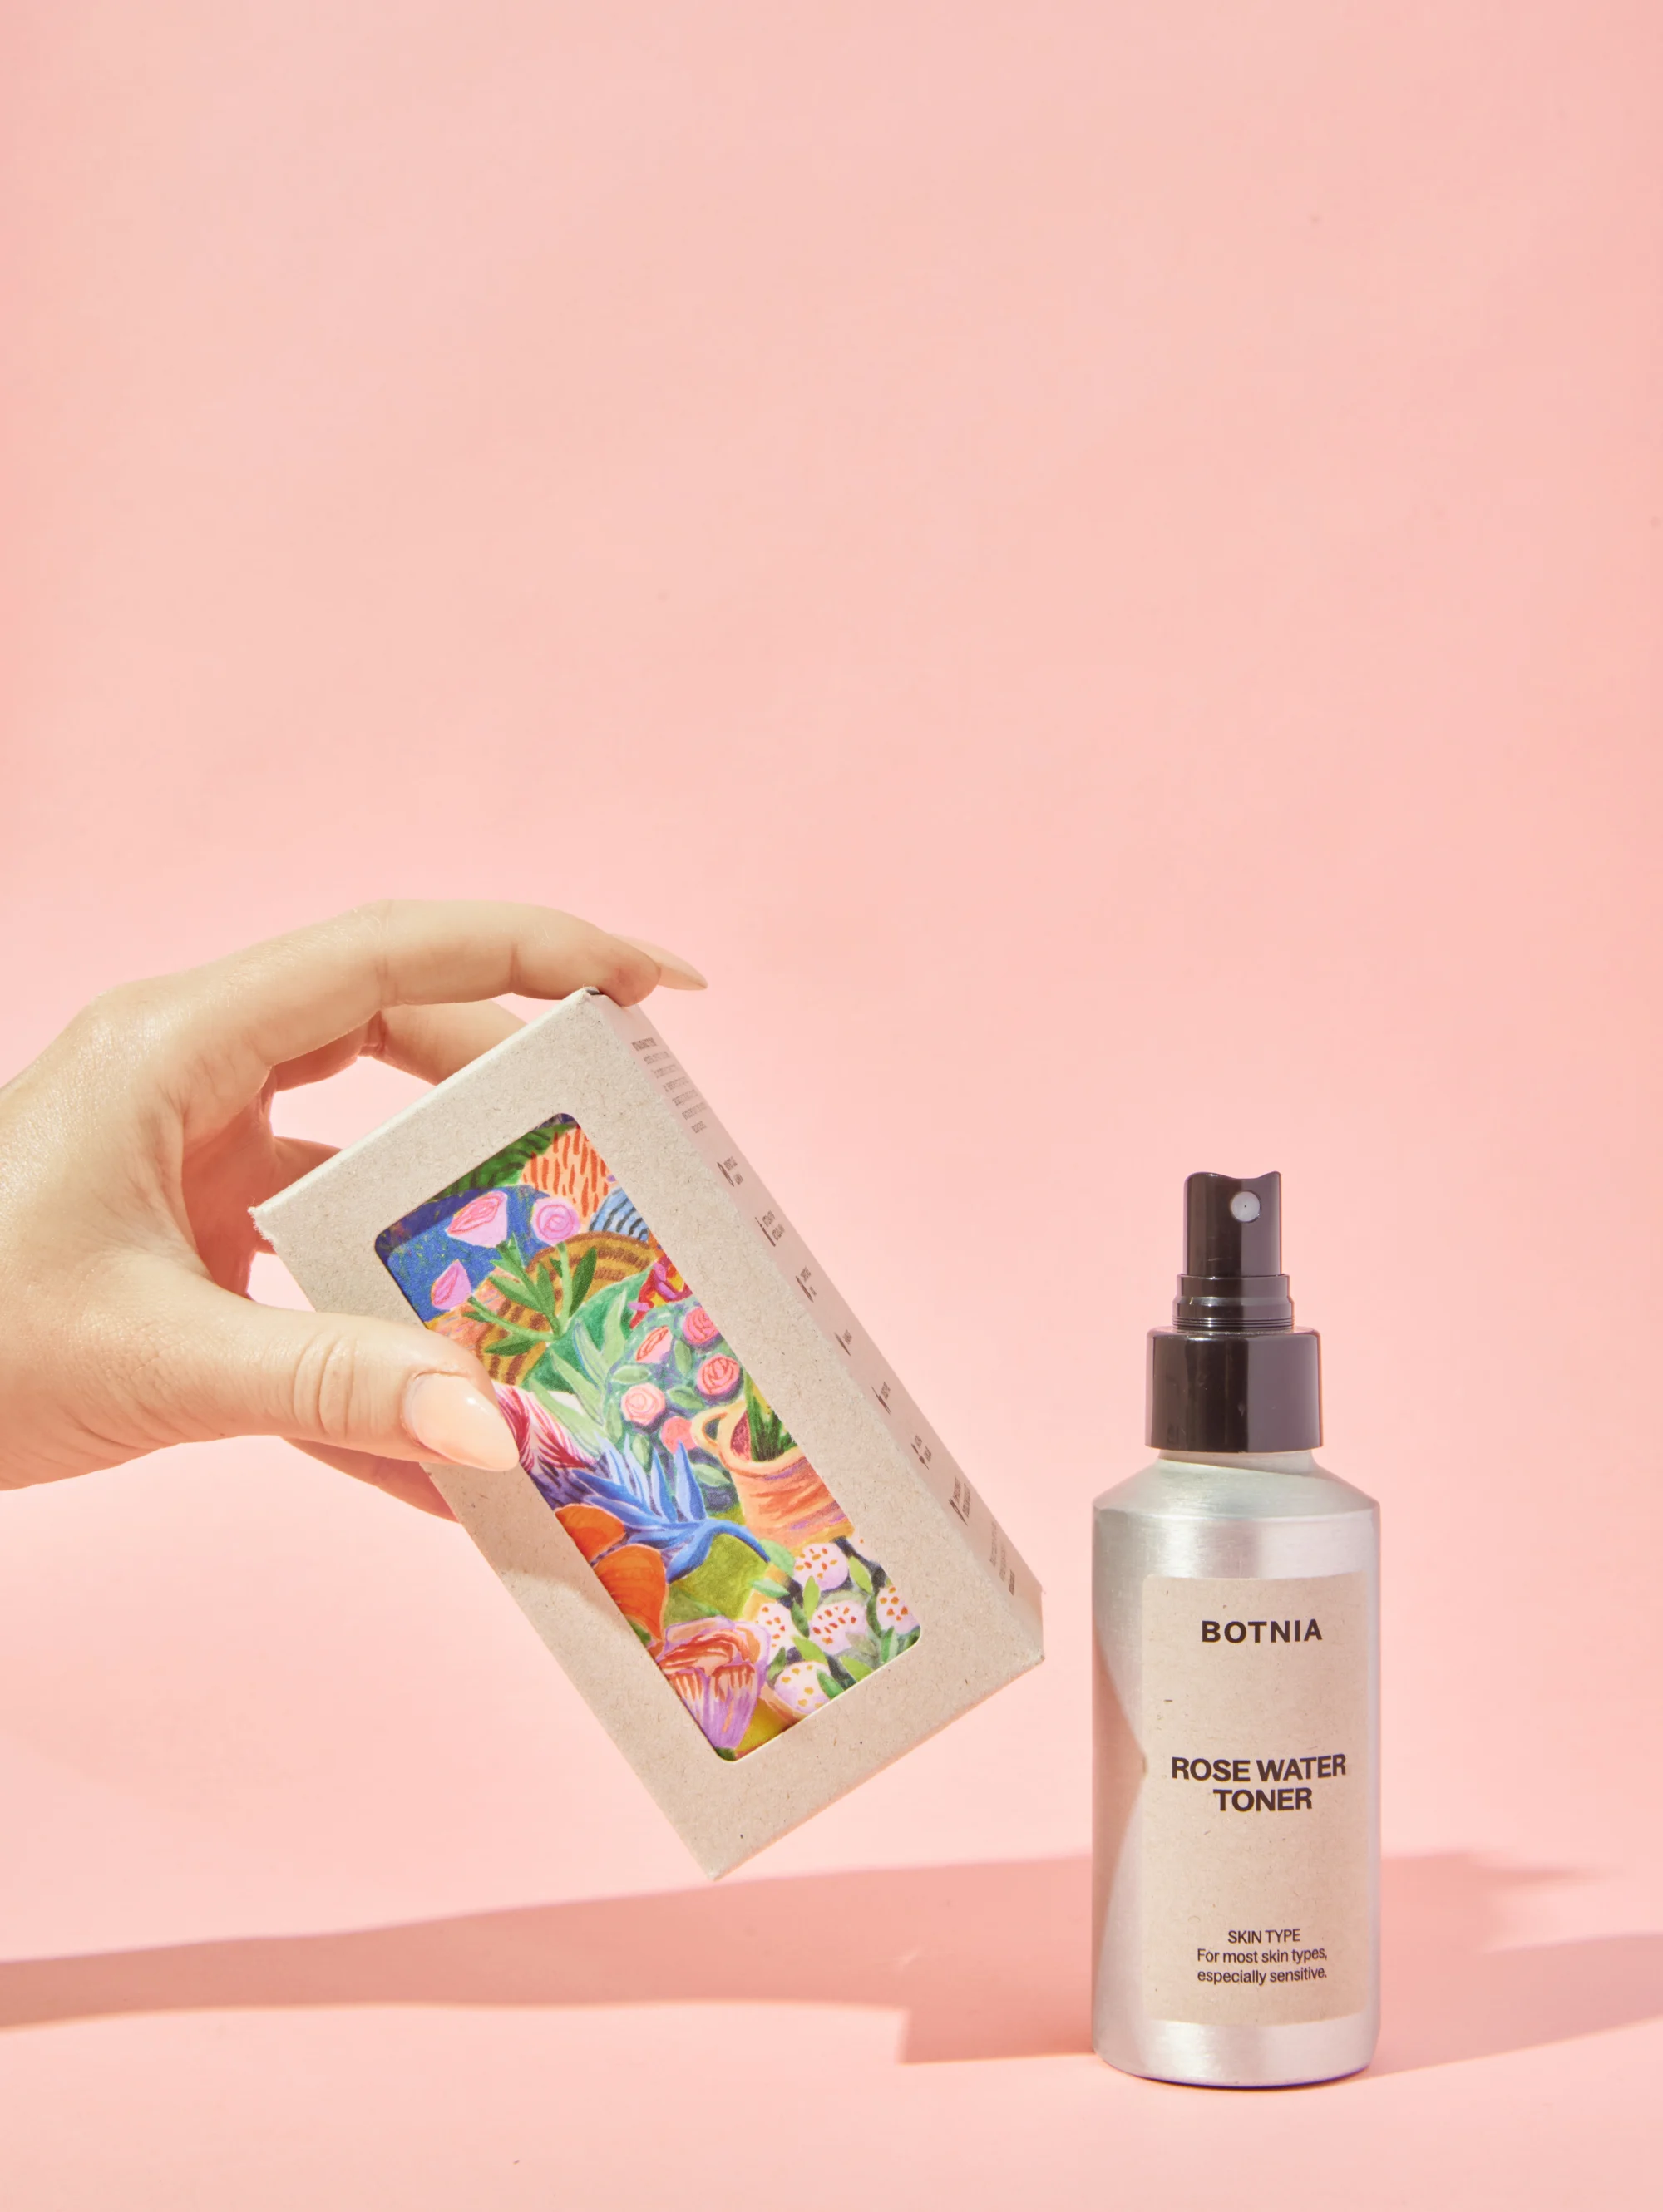 A bottle of Rose Water Toner from the brand Botnia on a light pink background